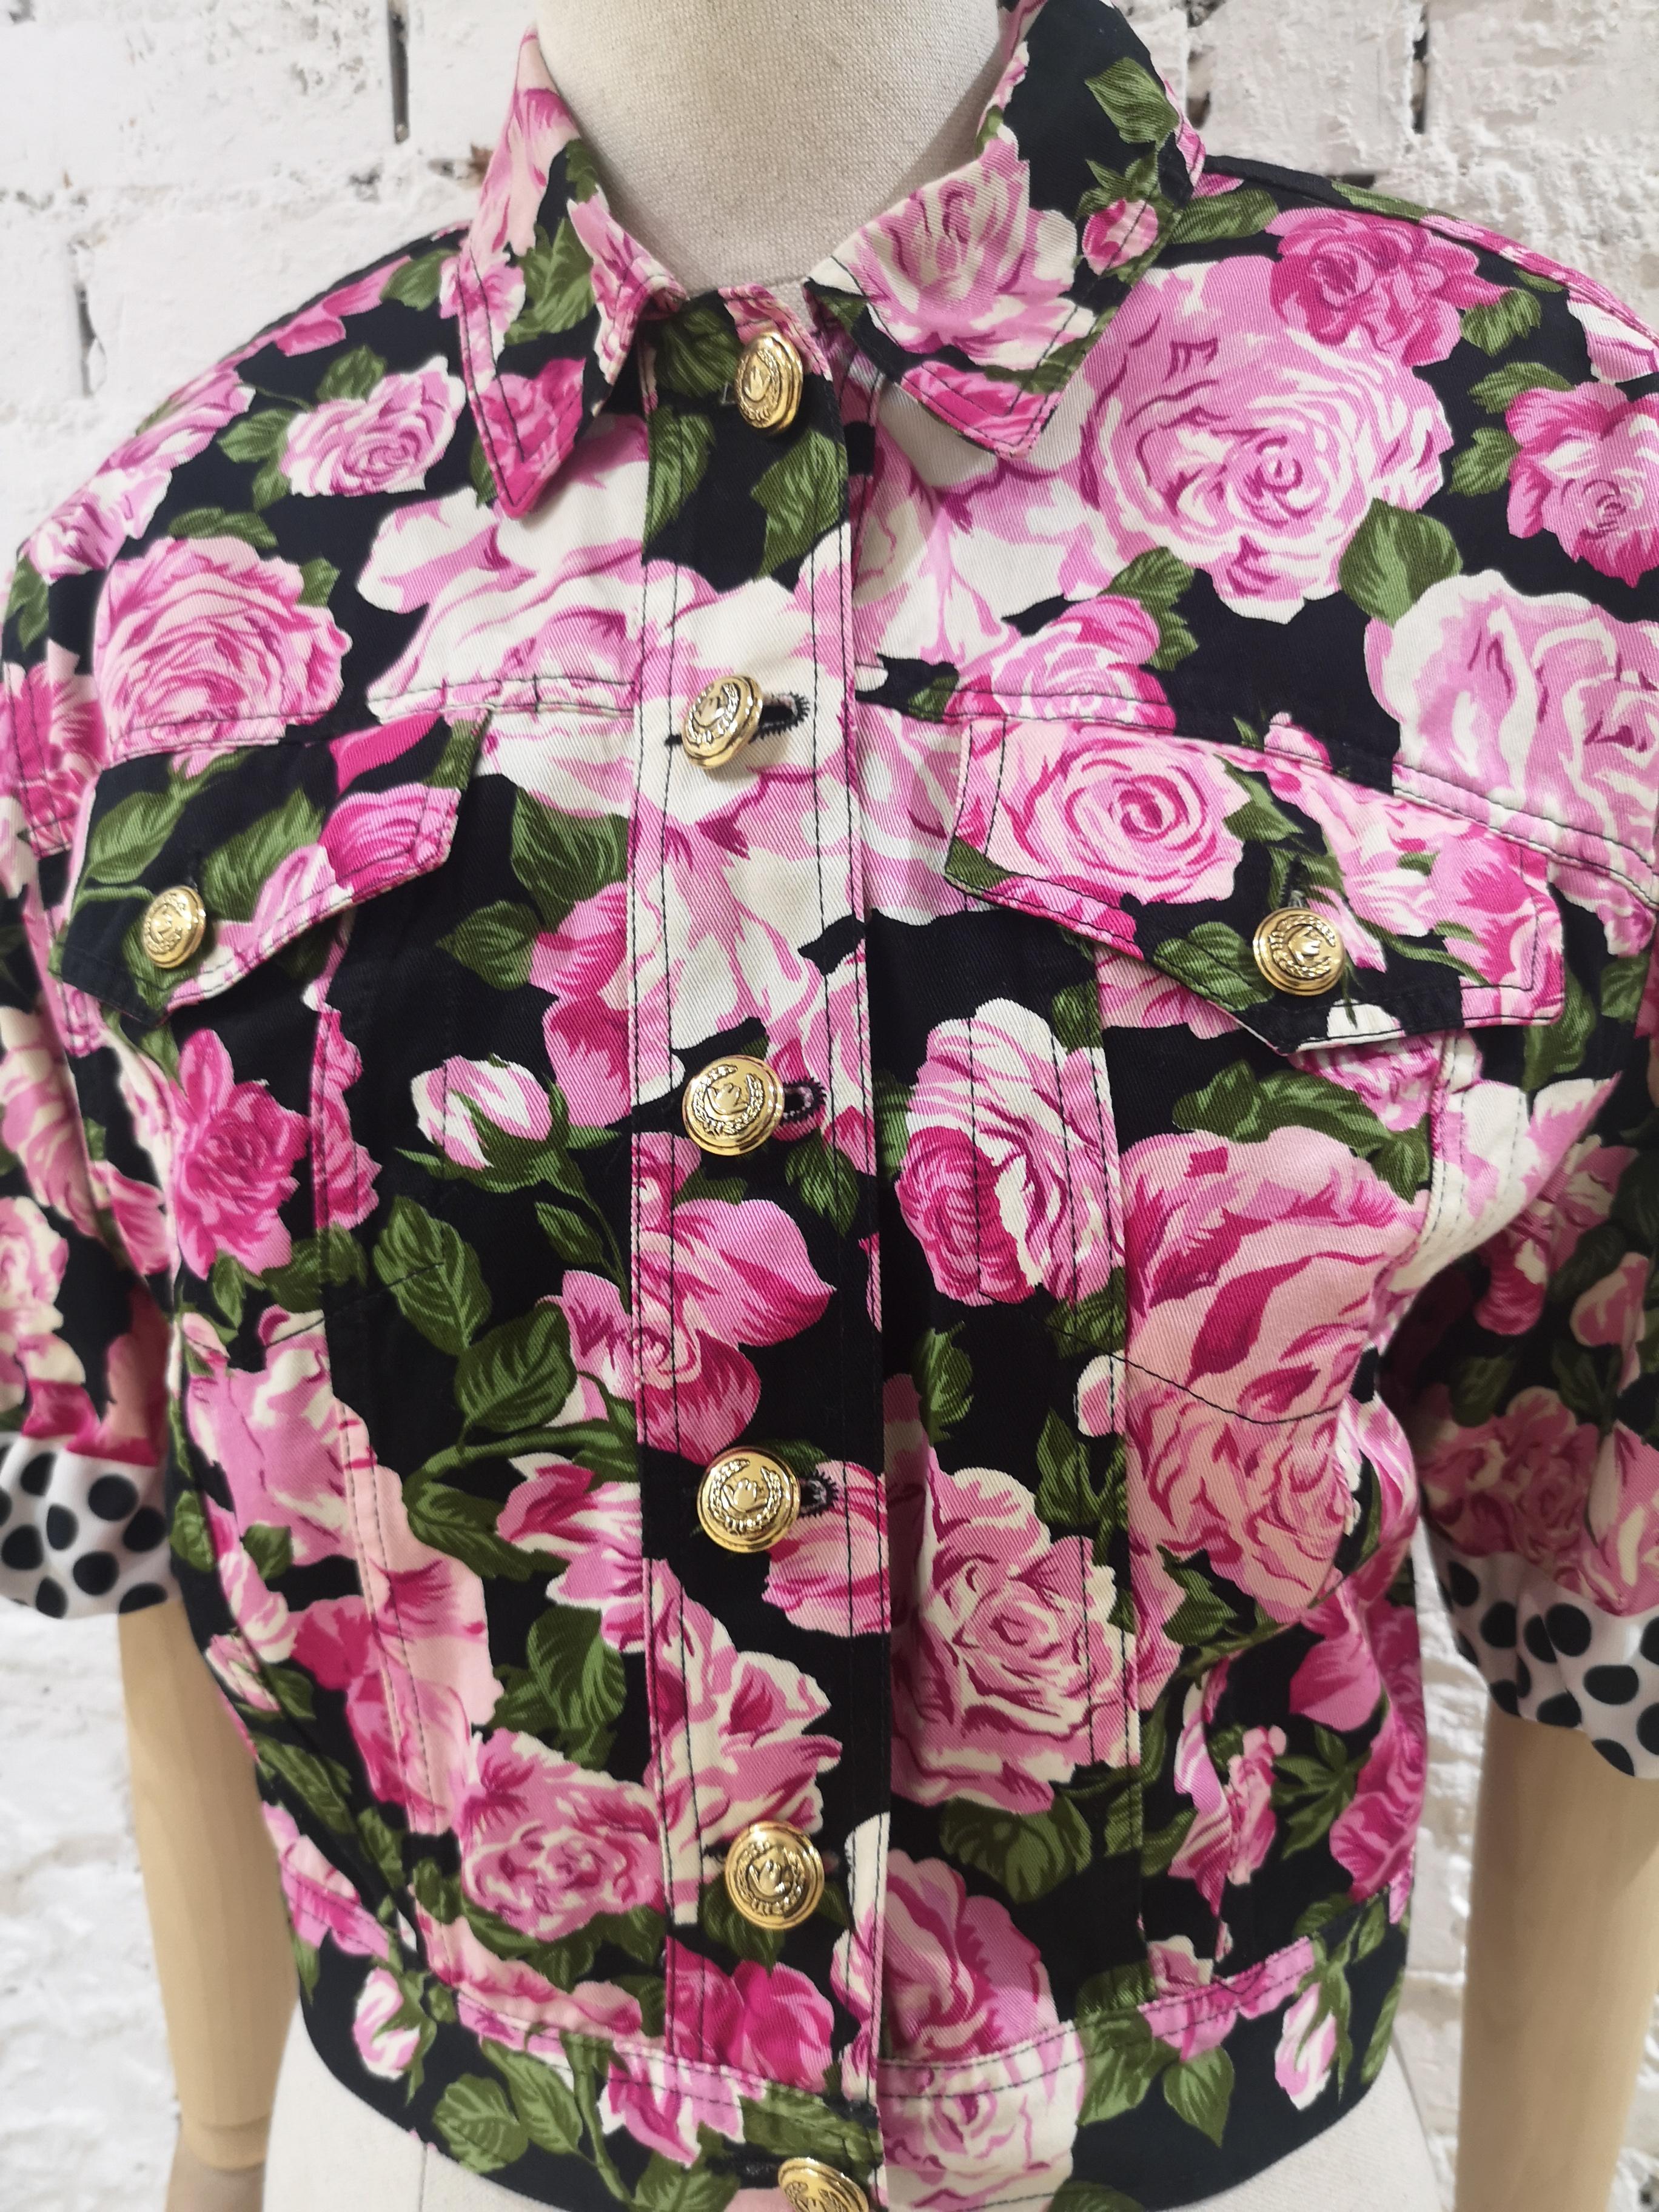 Moschino black pink roses cotton jacket
totally made in italy vintage Moschino jacket
size 44
